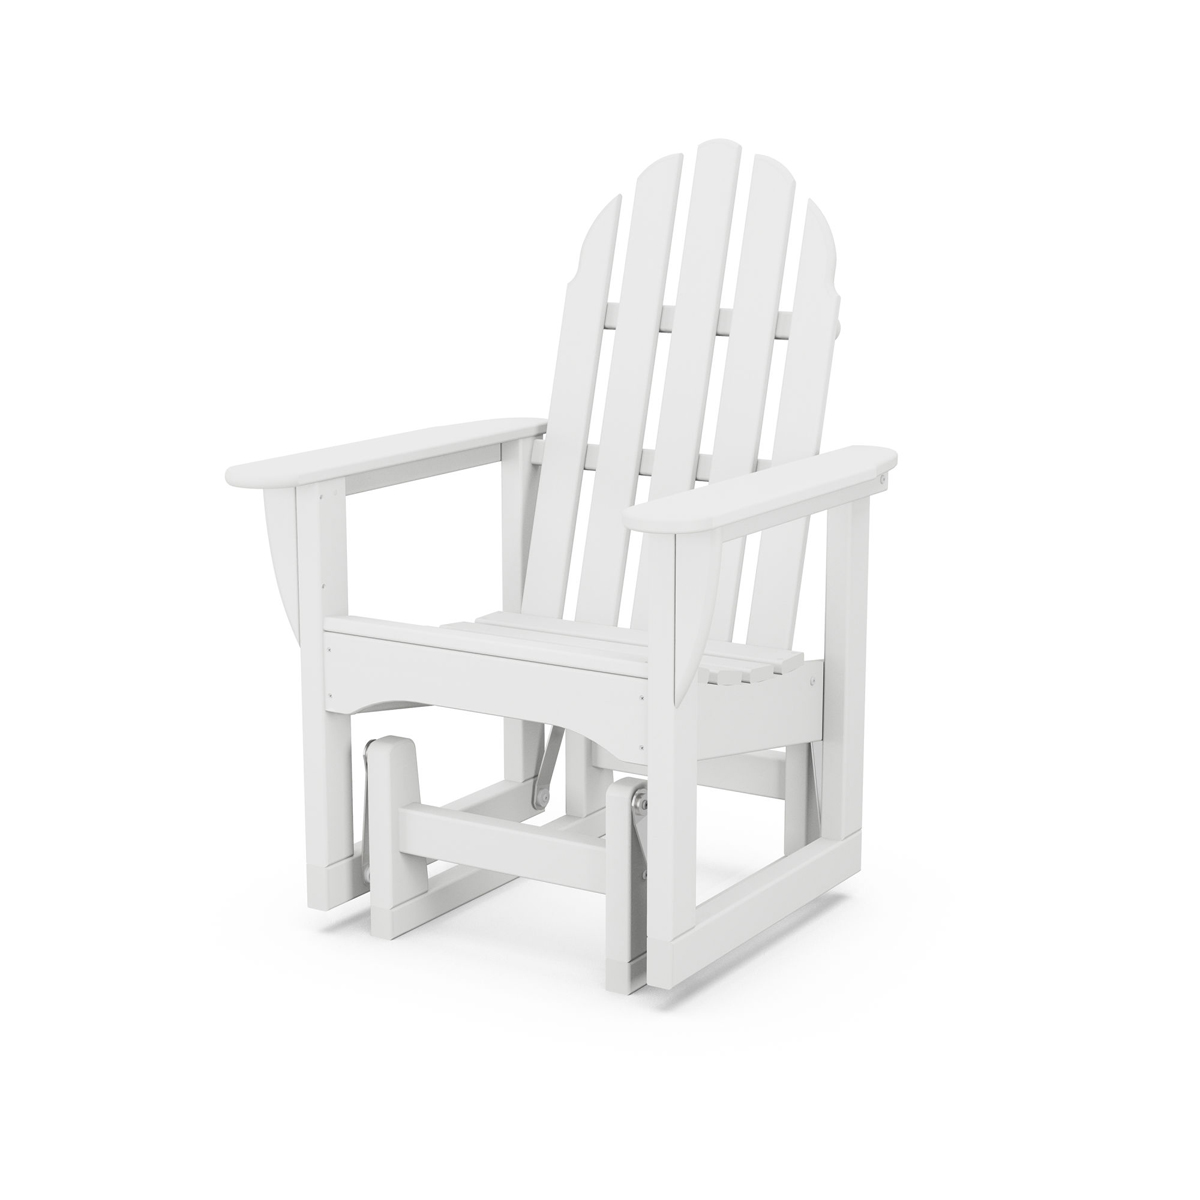 classic adirondack glider chair in white thumbnail image